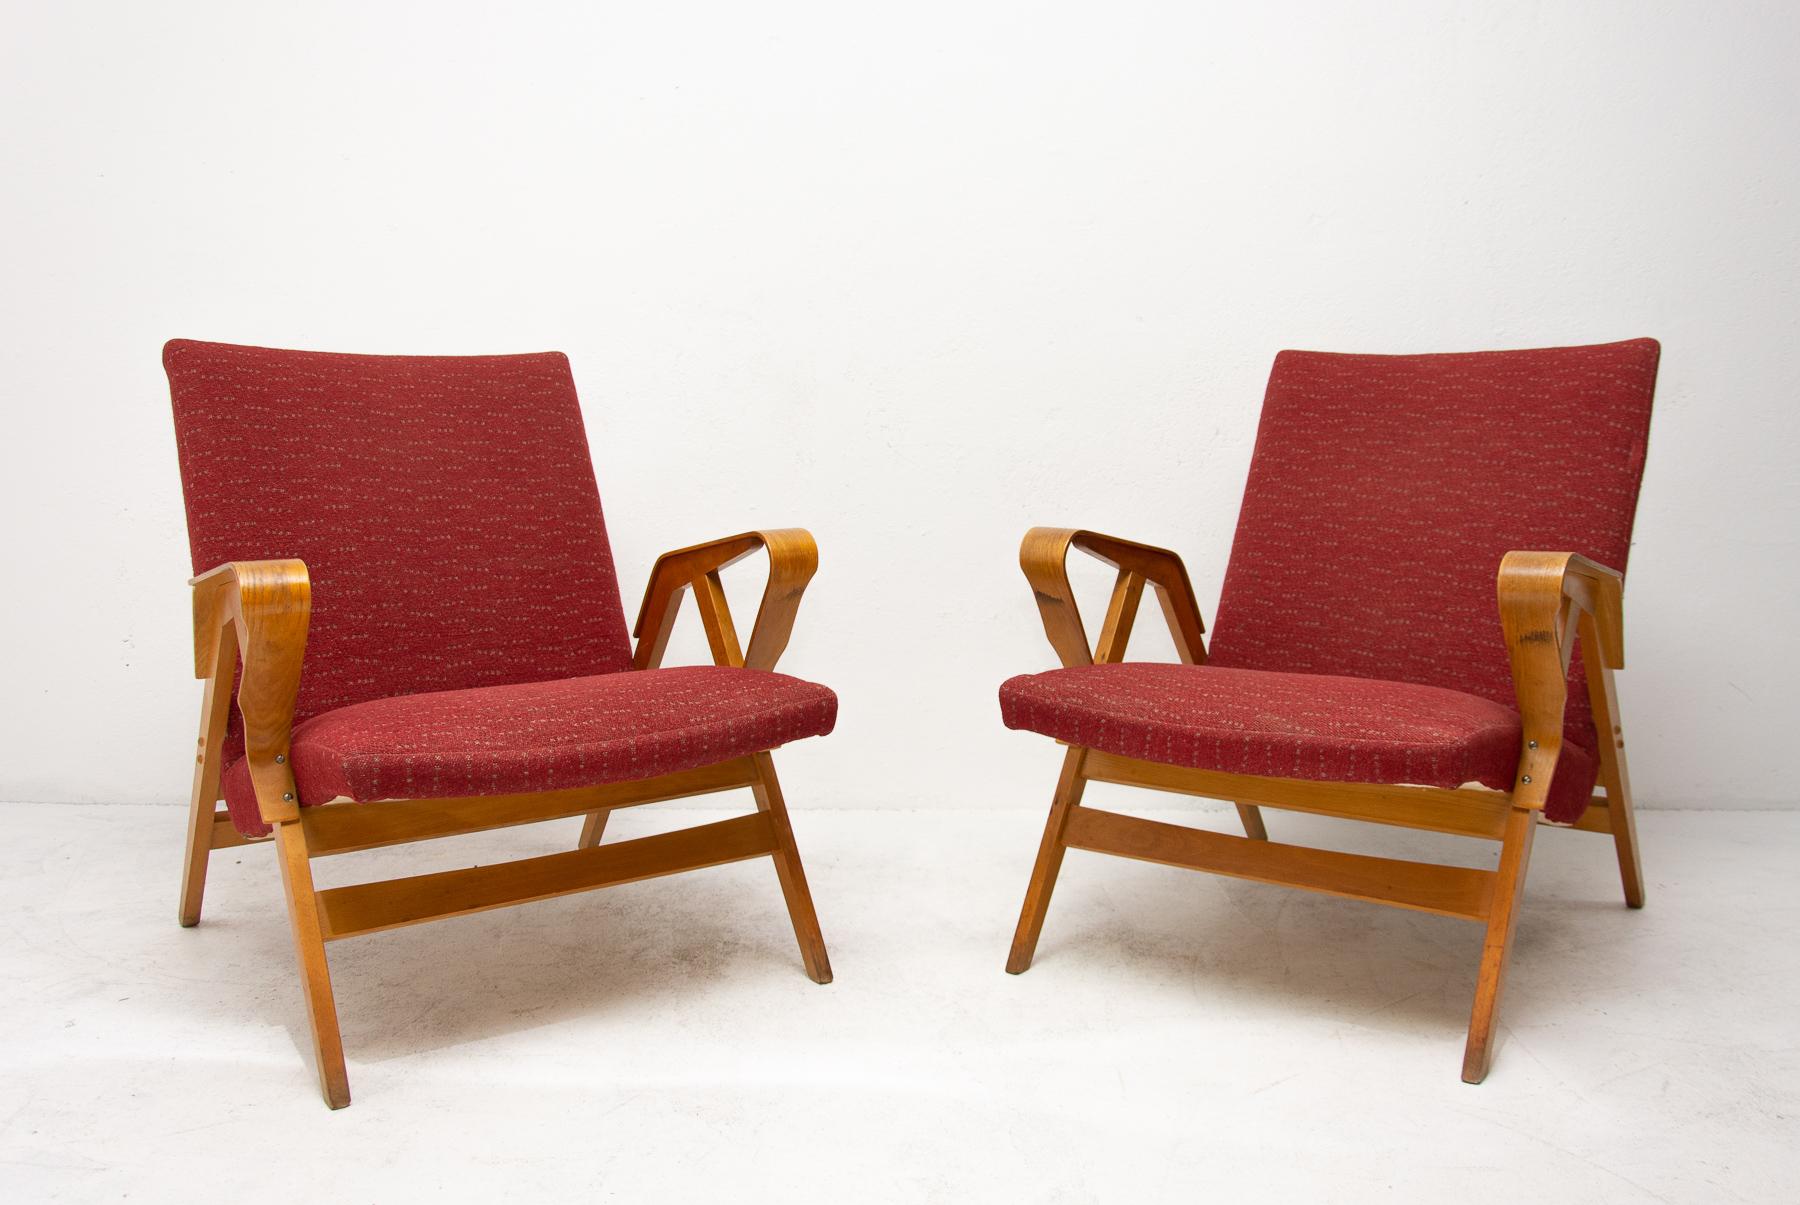 Pair of Midcentury Tatra Bentwood Armchairs, Czechoslovakia, 1960s In Good Condition In Prague 8, CZ